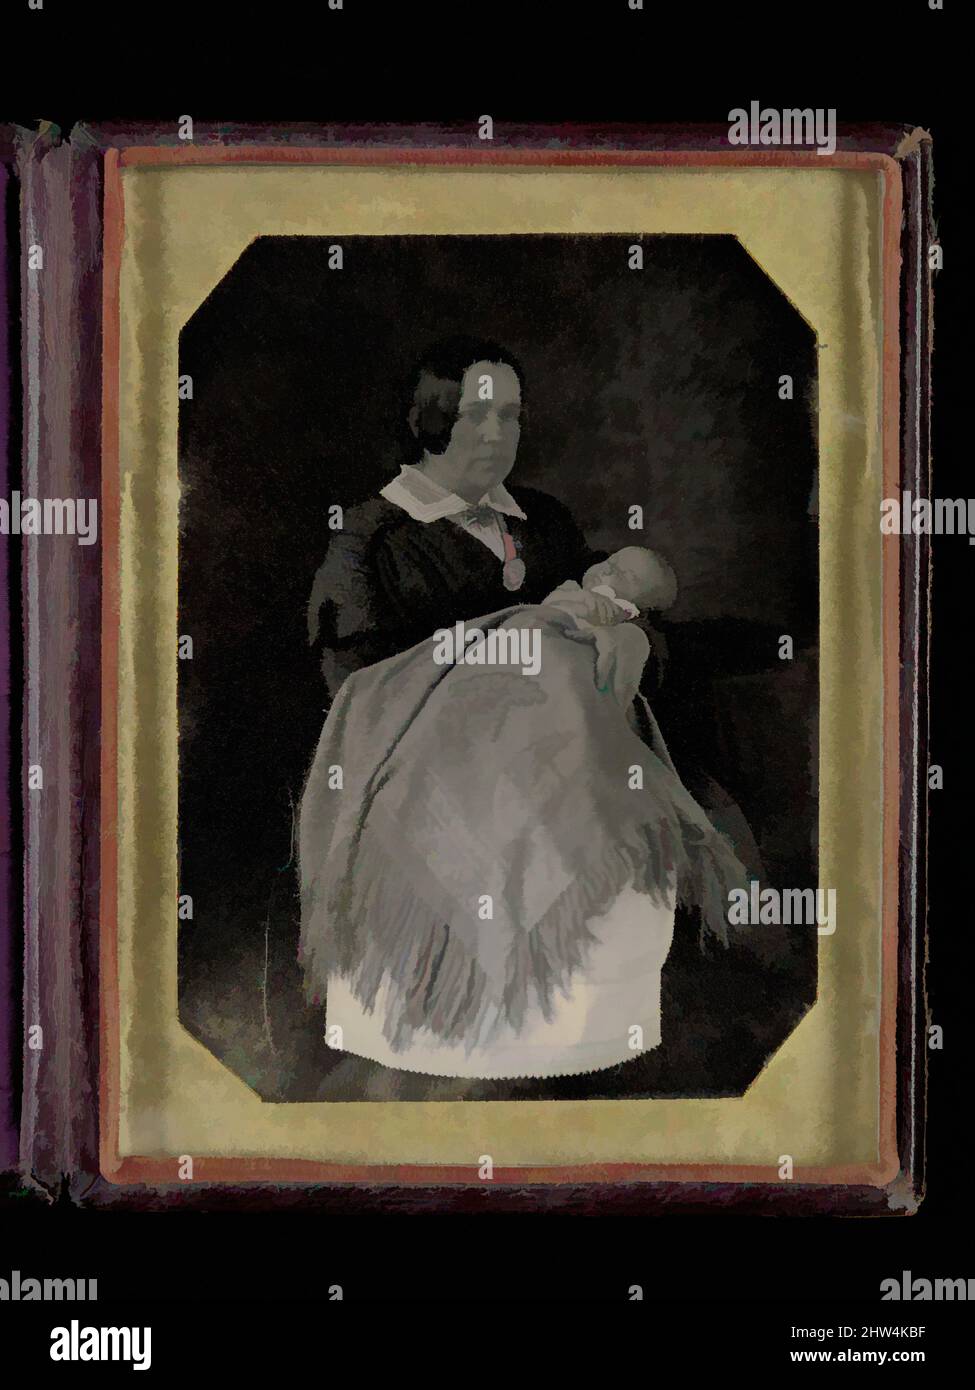 Art inspired by Mrs. Thomas Ustick Walter and Her Deceased Child, ca. 1846, Daguerreotype, Visible: 4 11/16 x 3 1/2, Case: 5 15/16 x 4 5/8 x 5/8, Photographs, William Langenheim (American, born Germany, Schöningen 1807–1874, Classic works modernized by Artotop with a splash of modernity. Shapes, color and value, eye-catching visual impact on art. Emotions through freedom of artworks in a contemporary way. A timeless message pursuing a wildly creative new direction. Artists turning to the digital medium and creating the Artotop NFT Stock Photo